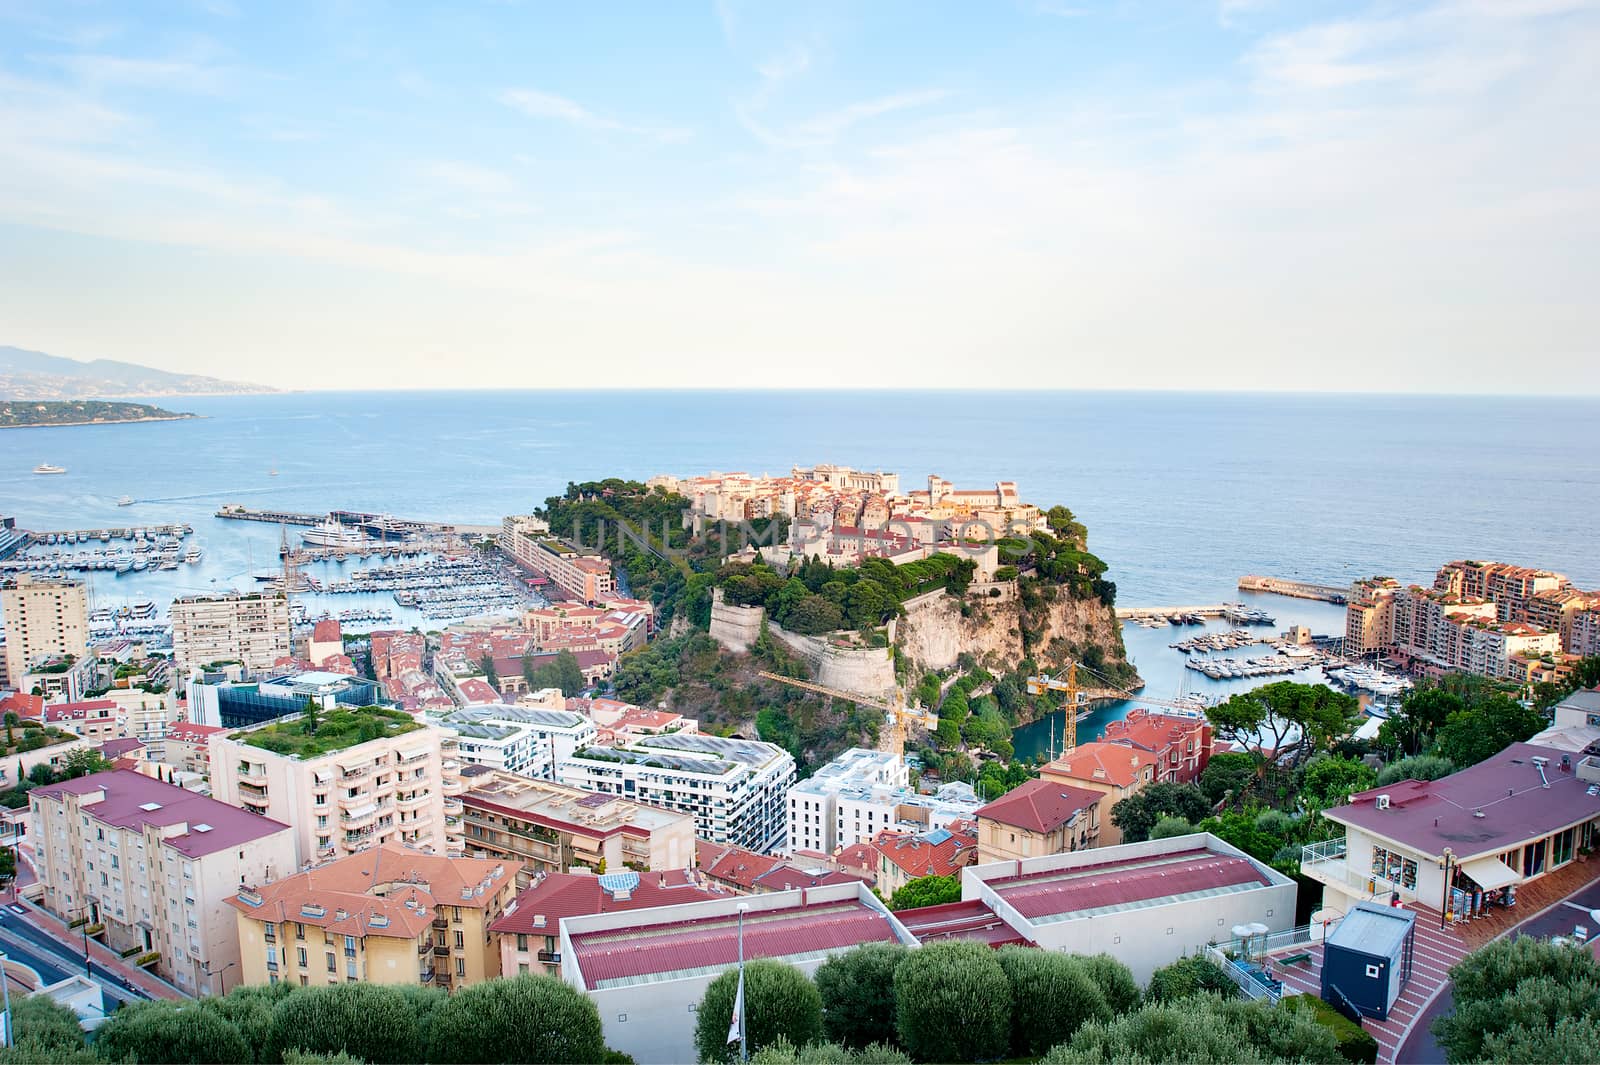 Skyline of Monaco ( Monte Carlo) with old town in the center